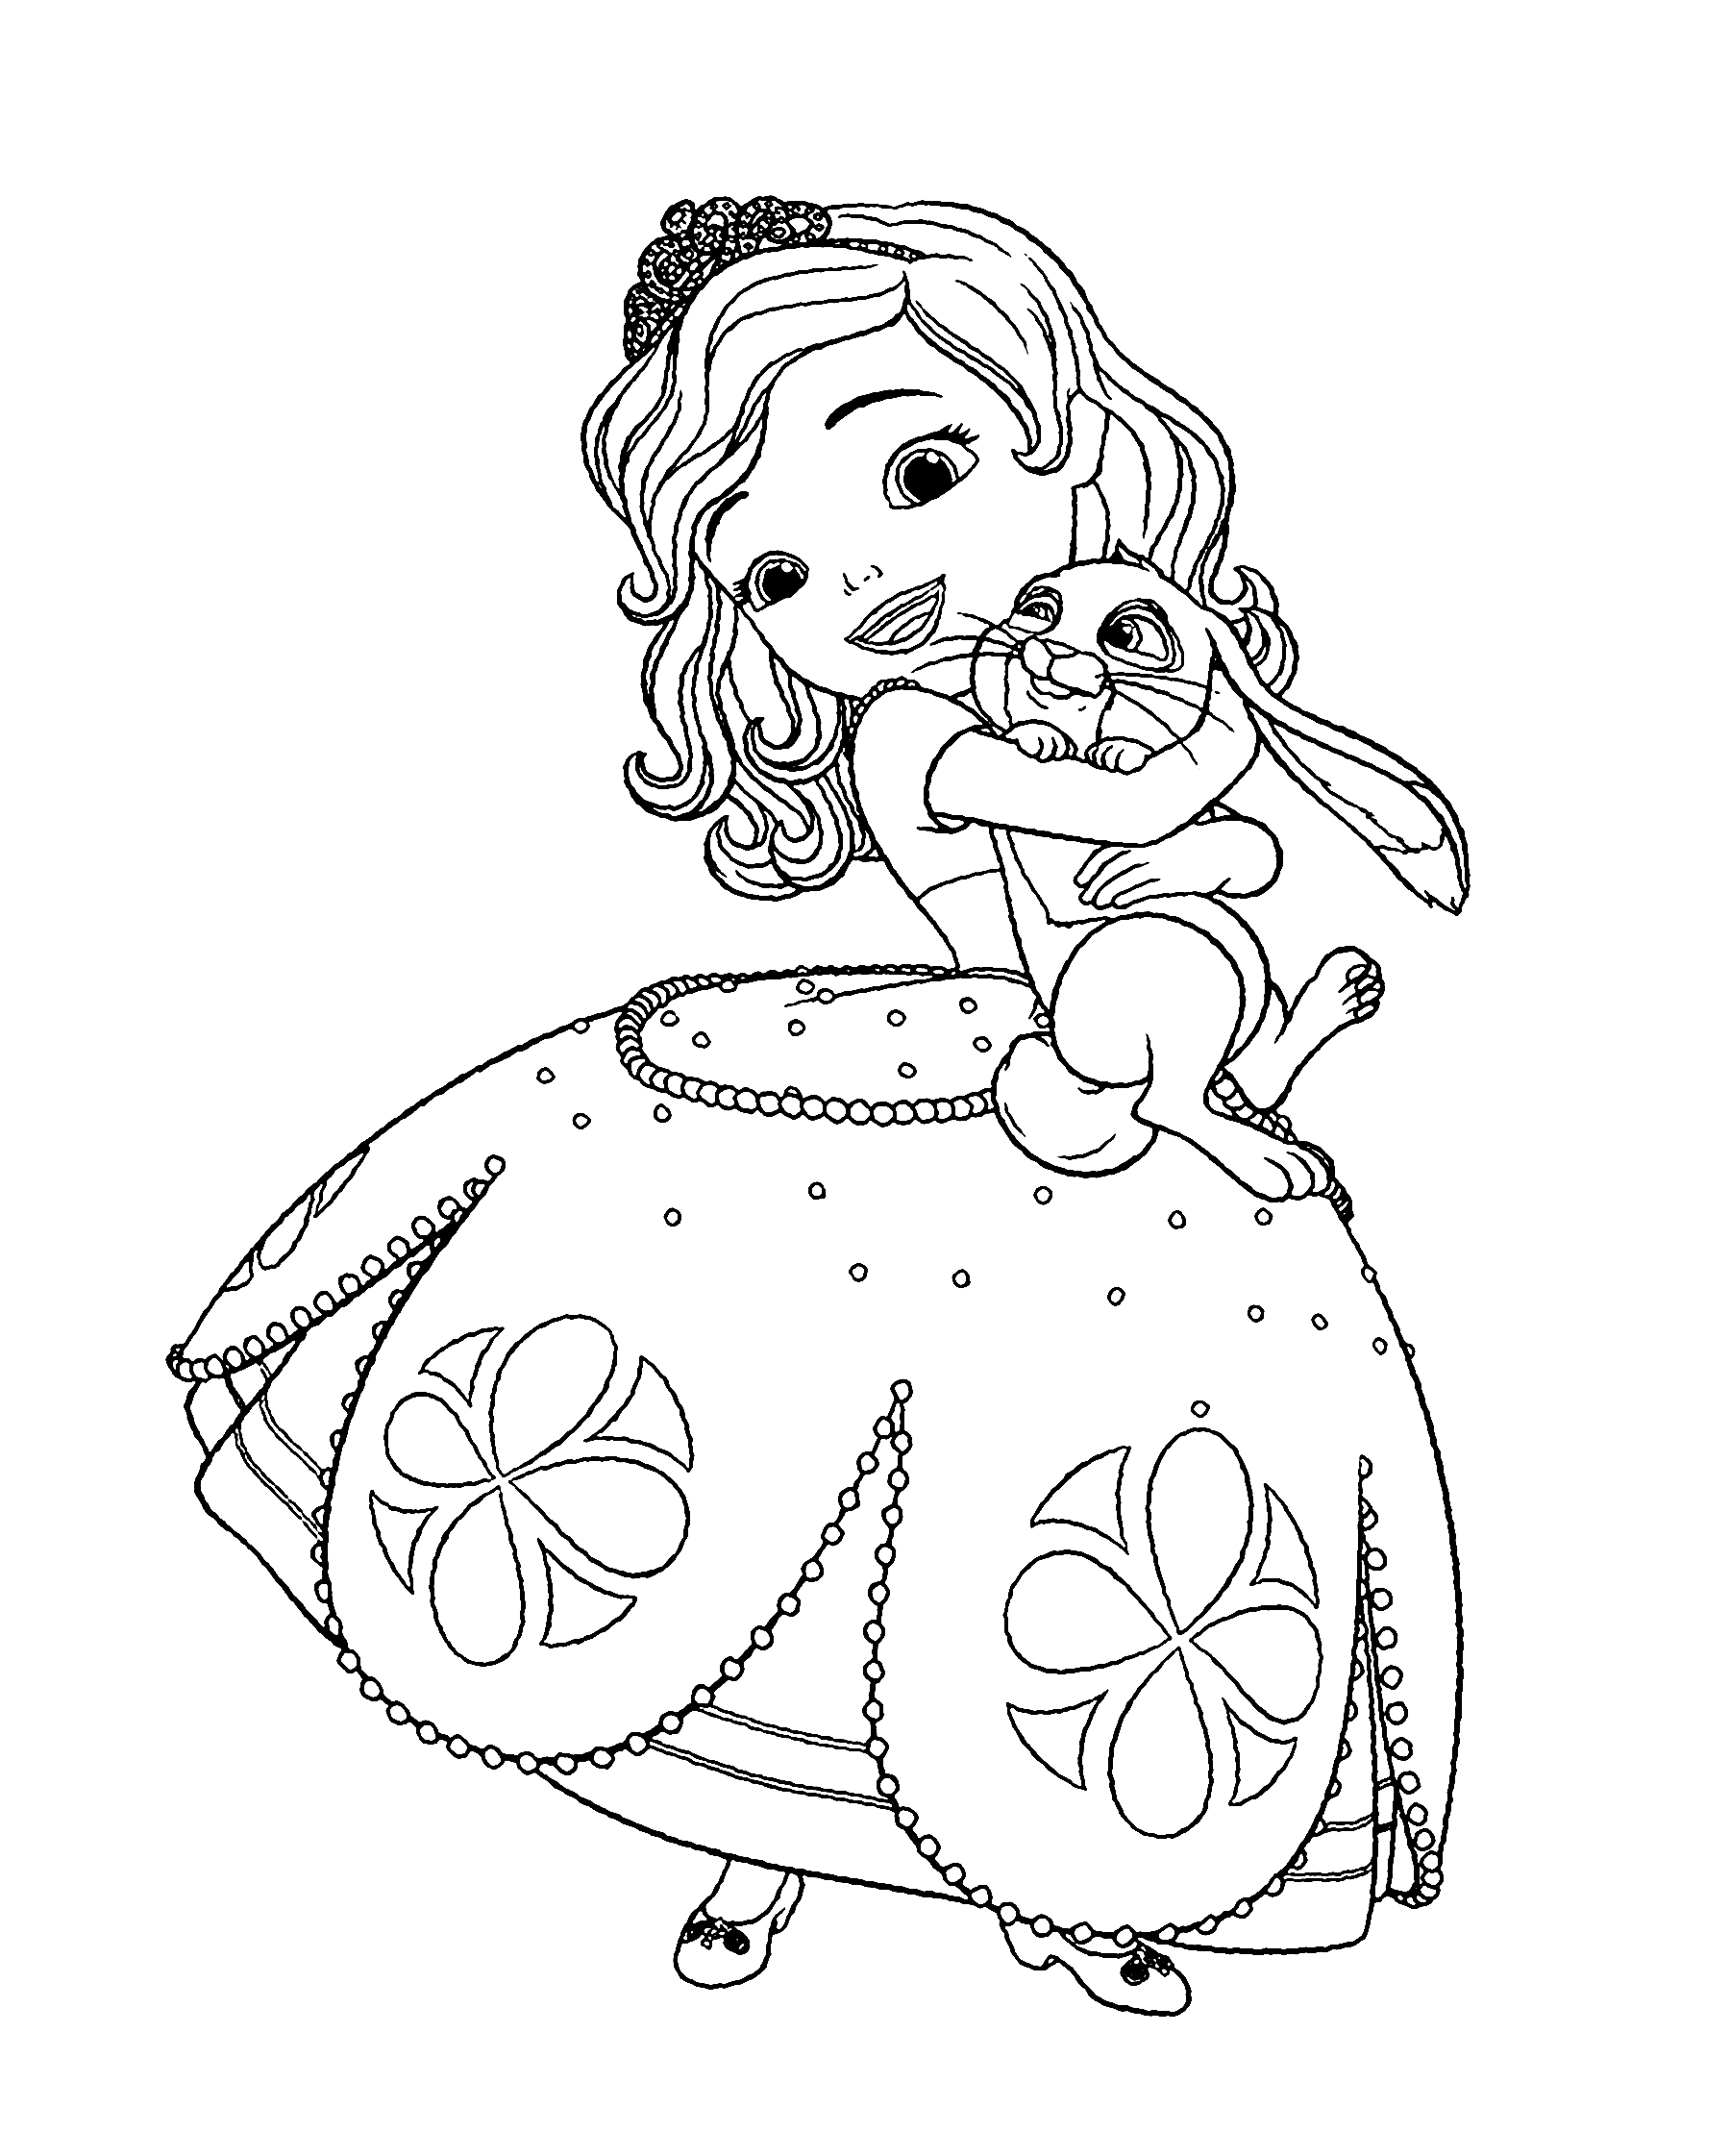 Coloring Page of Rabbit Clover Playing with Sofia the First